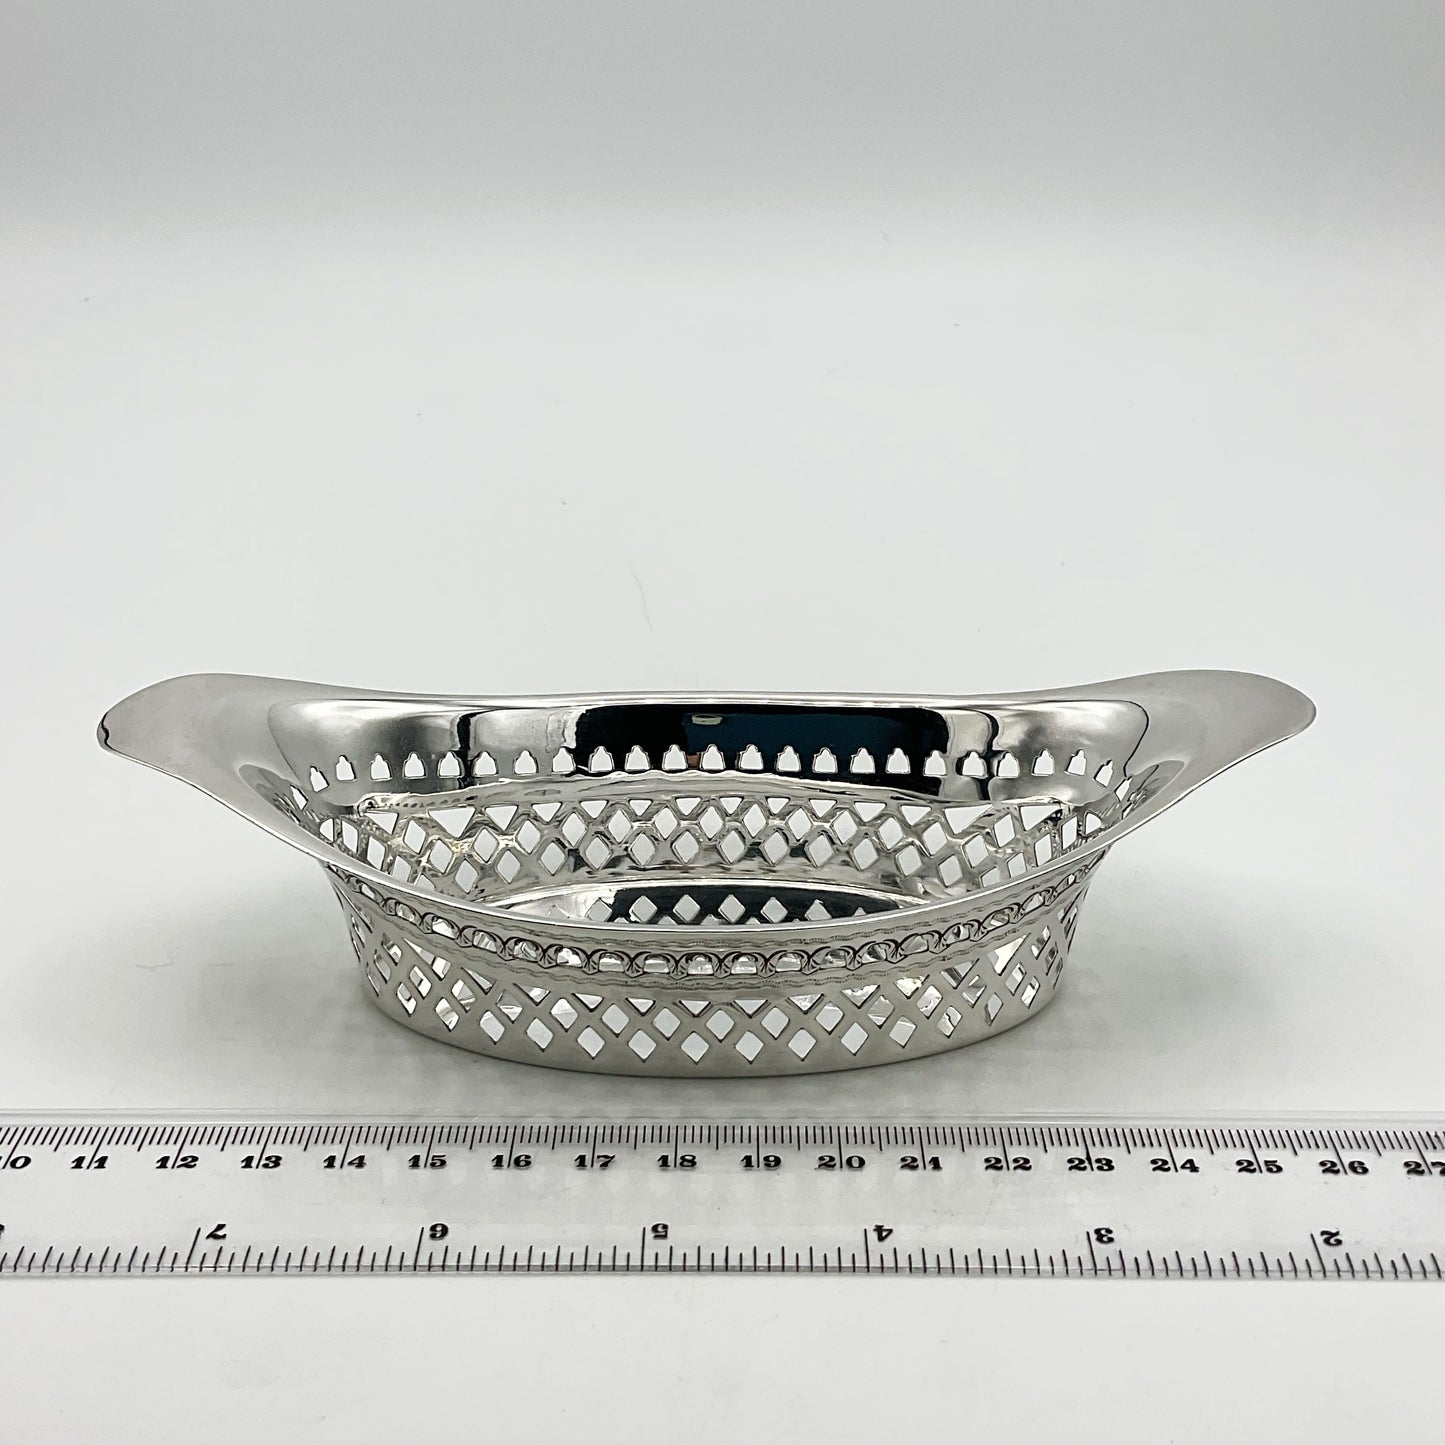 Side view of antique silver pierced bowl and a ruler showing the width as approximately 15cm